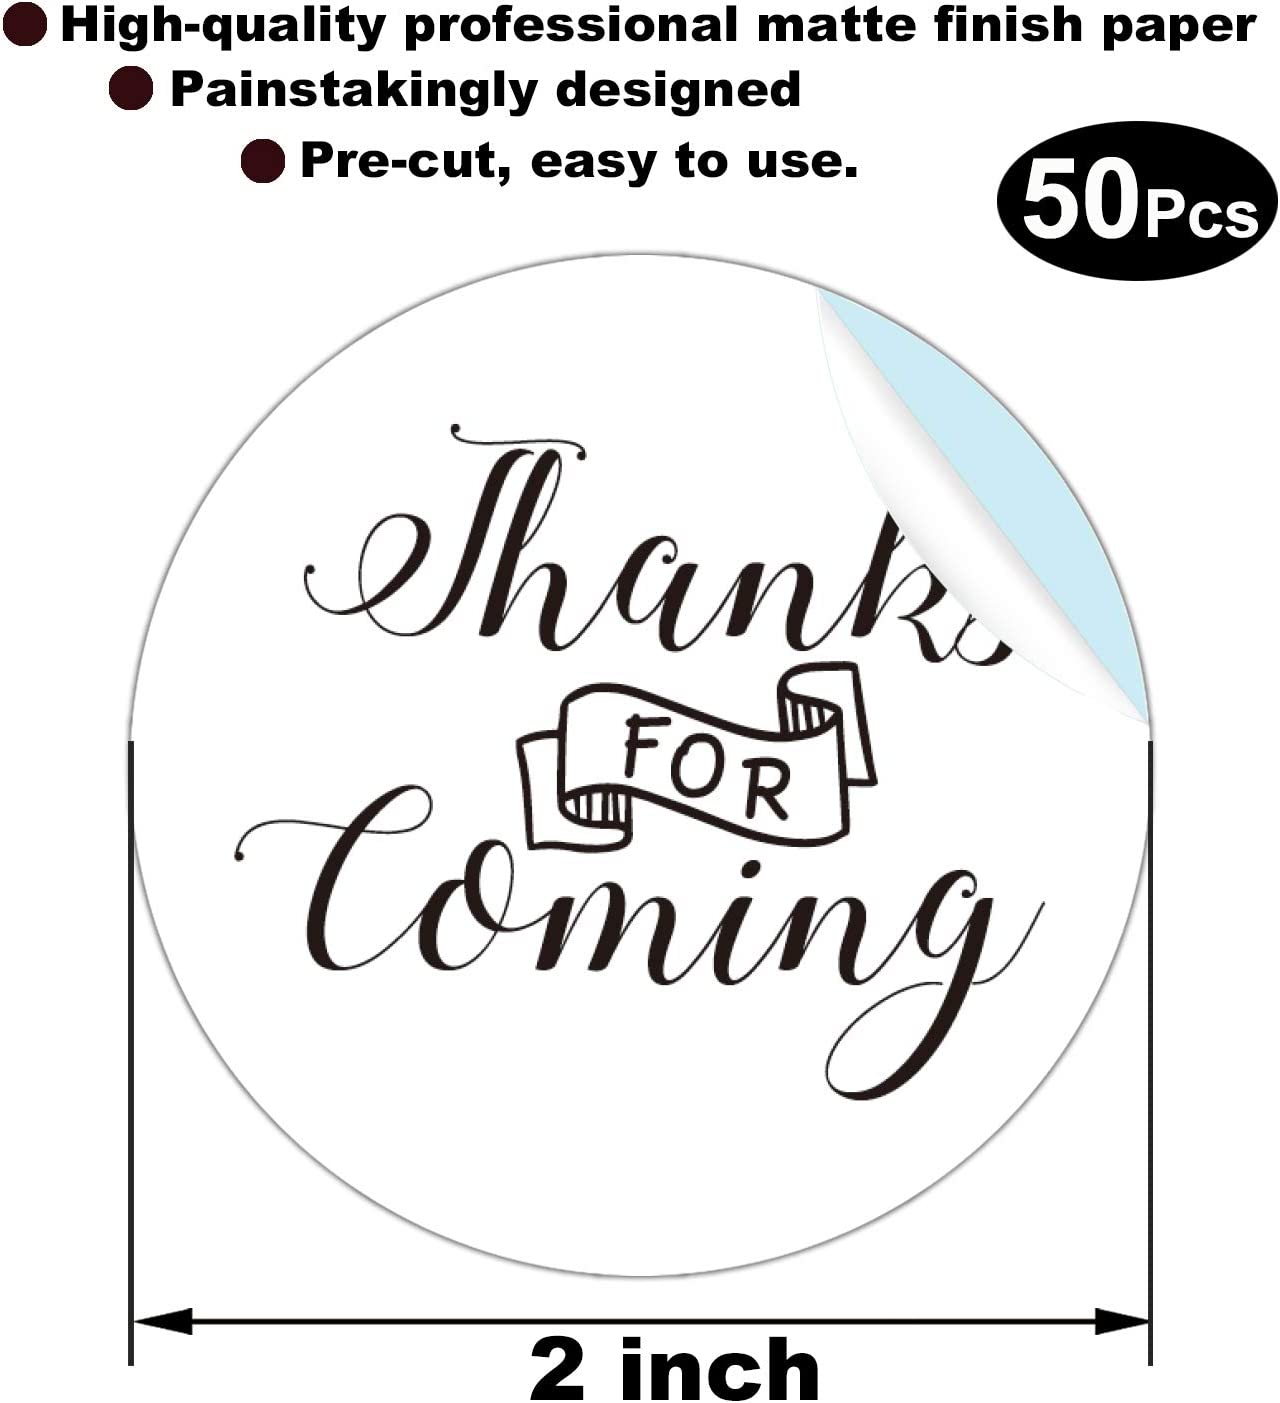 (A circular adhesive sticker printed with the phrase  (Thank you